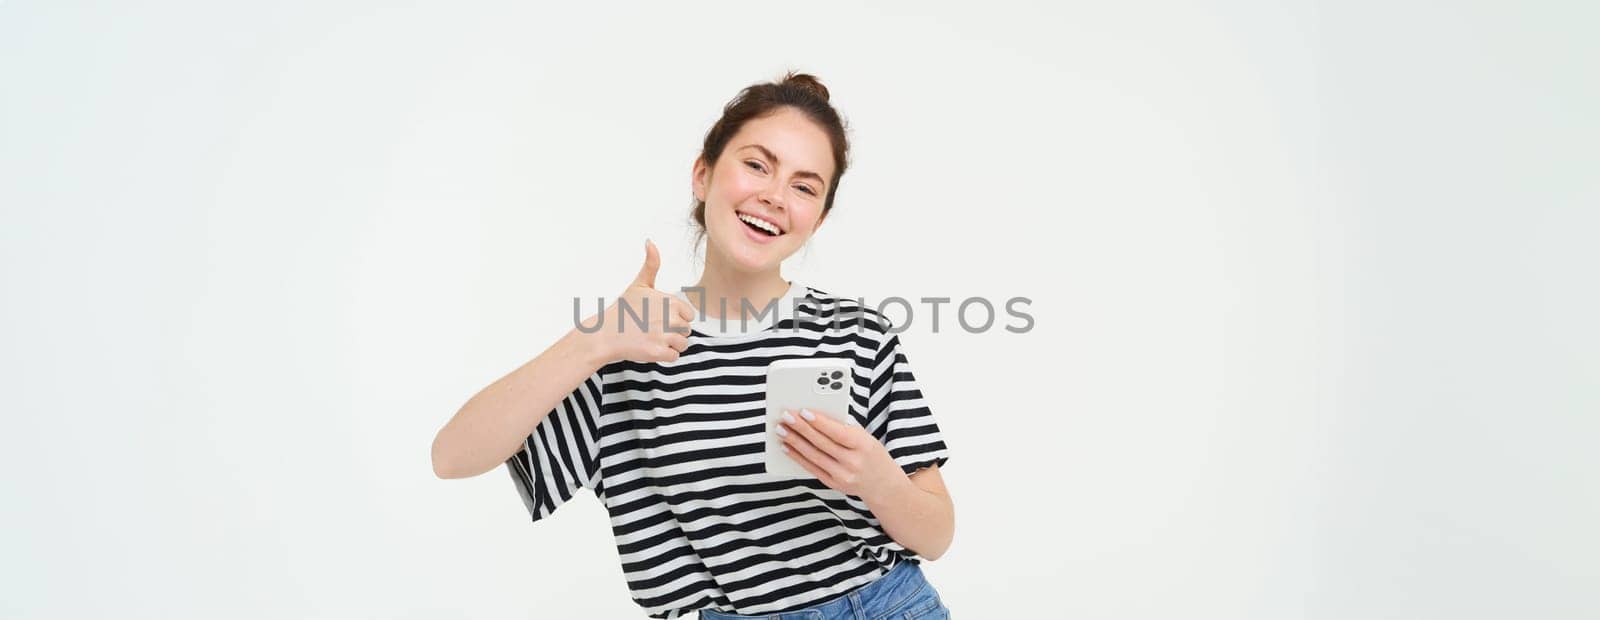 Enthusiastic girl with smartphone shows thumbs up, isolated over white background.